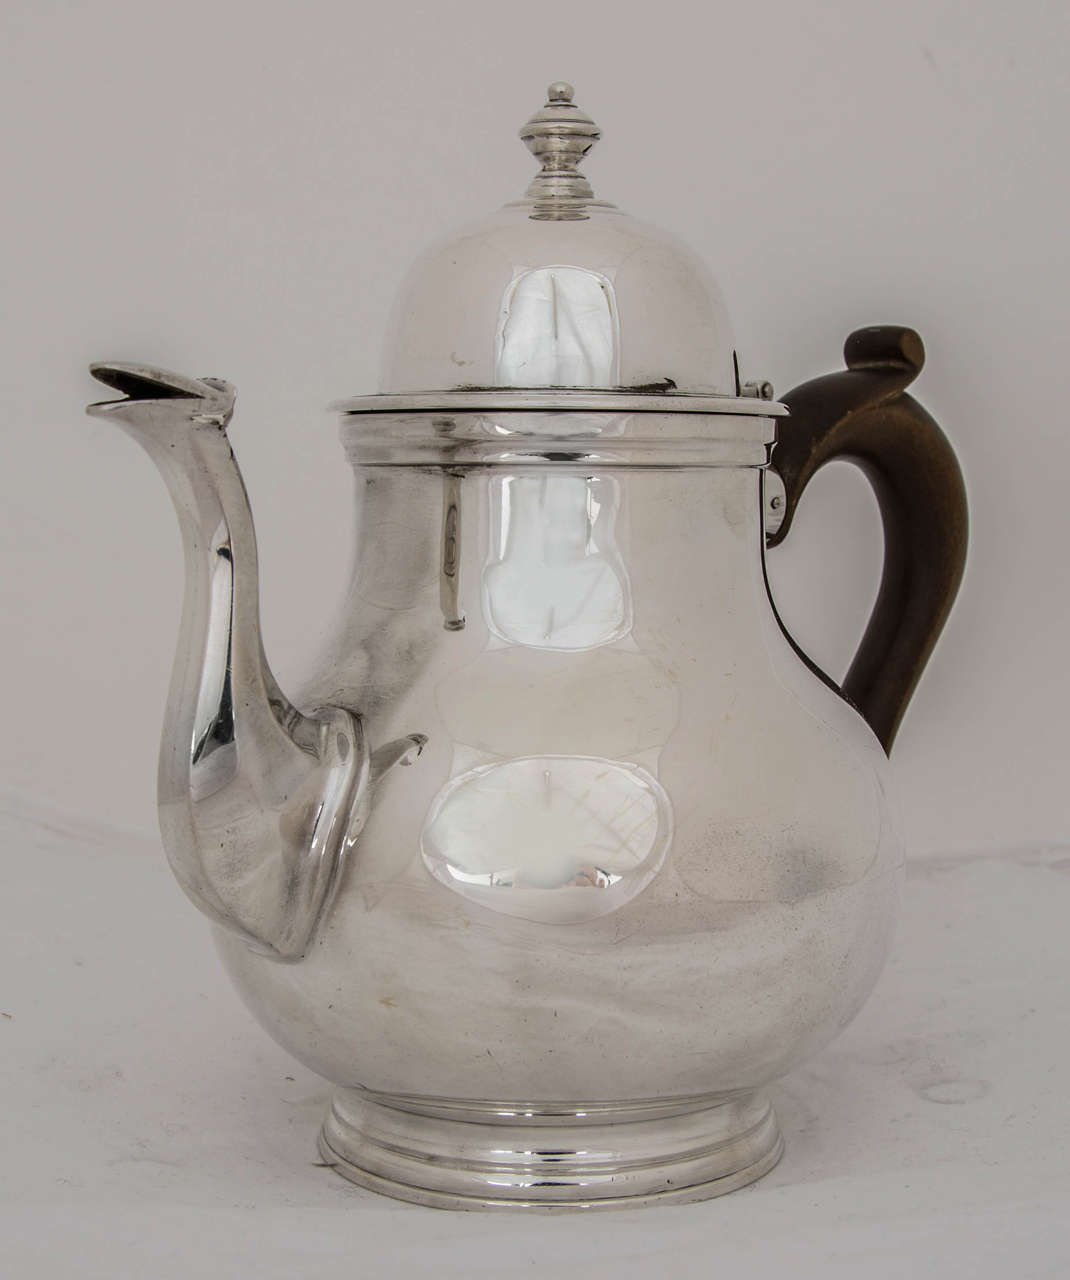 A lovely English silver teapot made in London, 1946.
This teapot is very good quality, and has a brown wood handle.
Height is 7.4